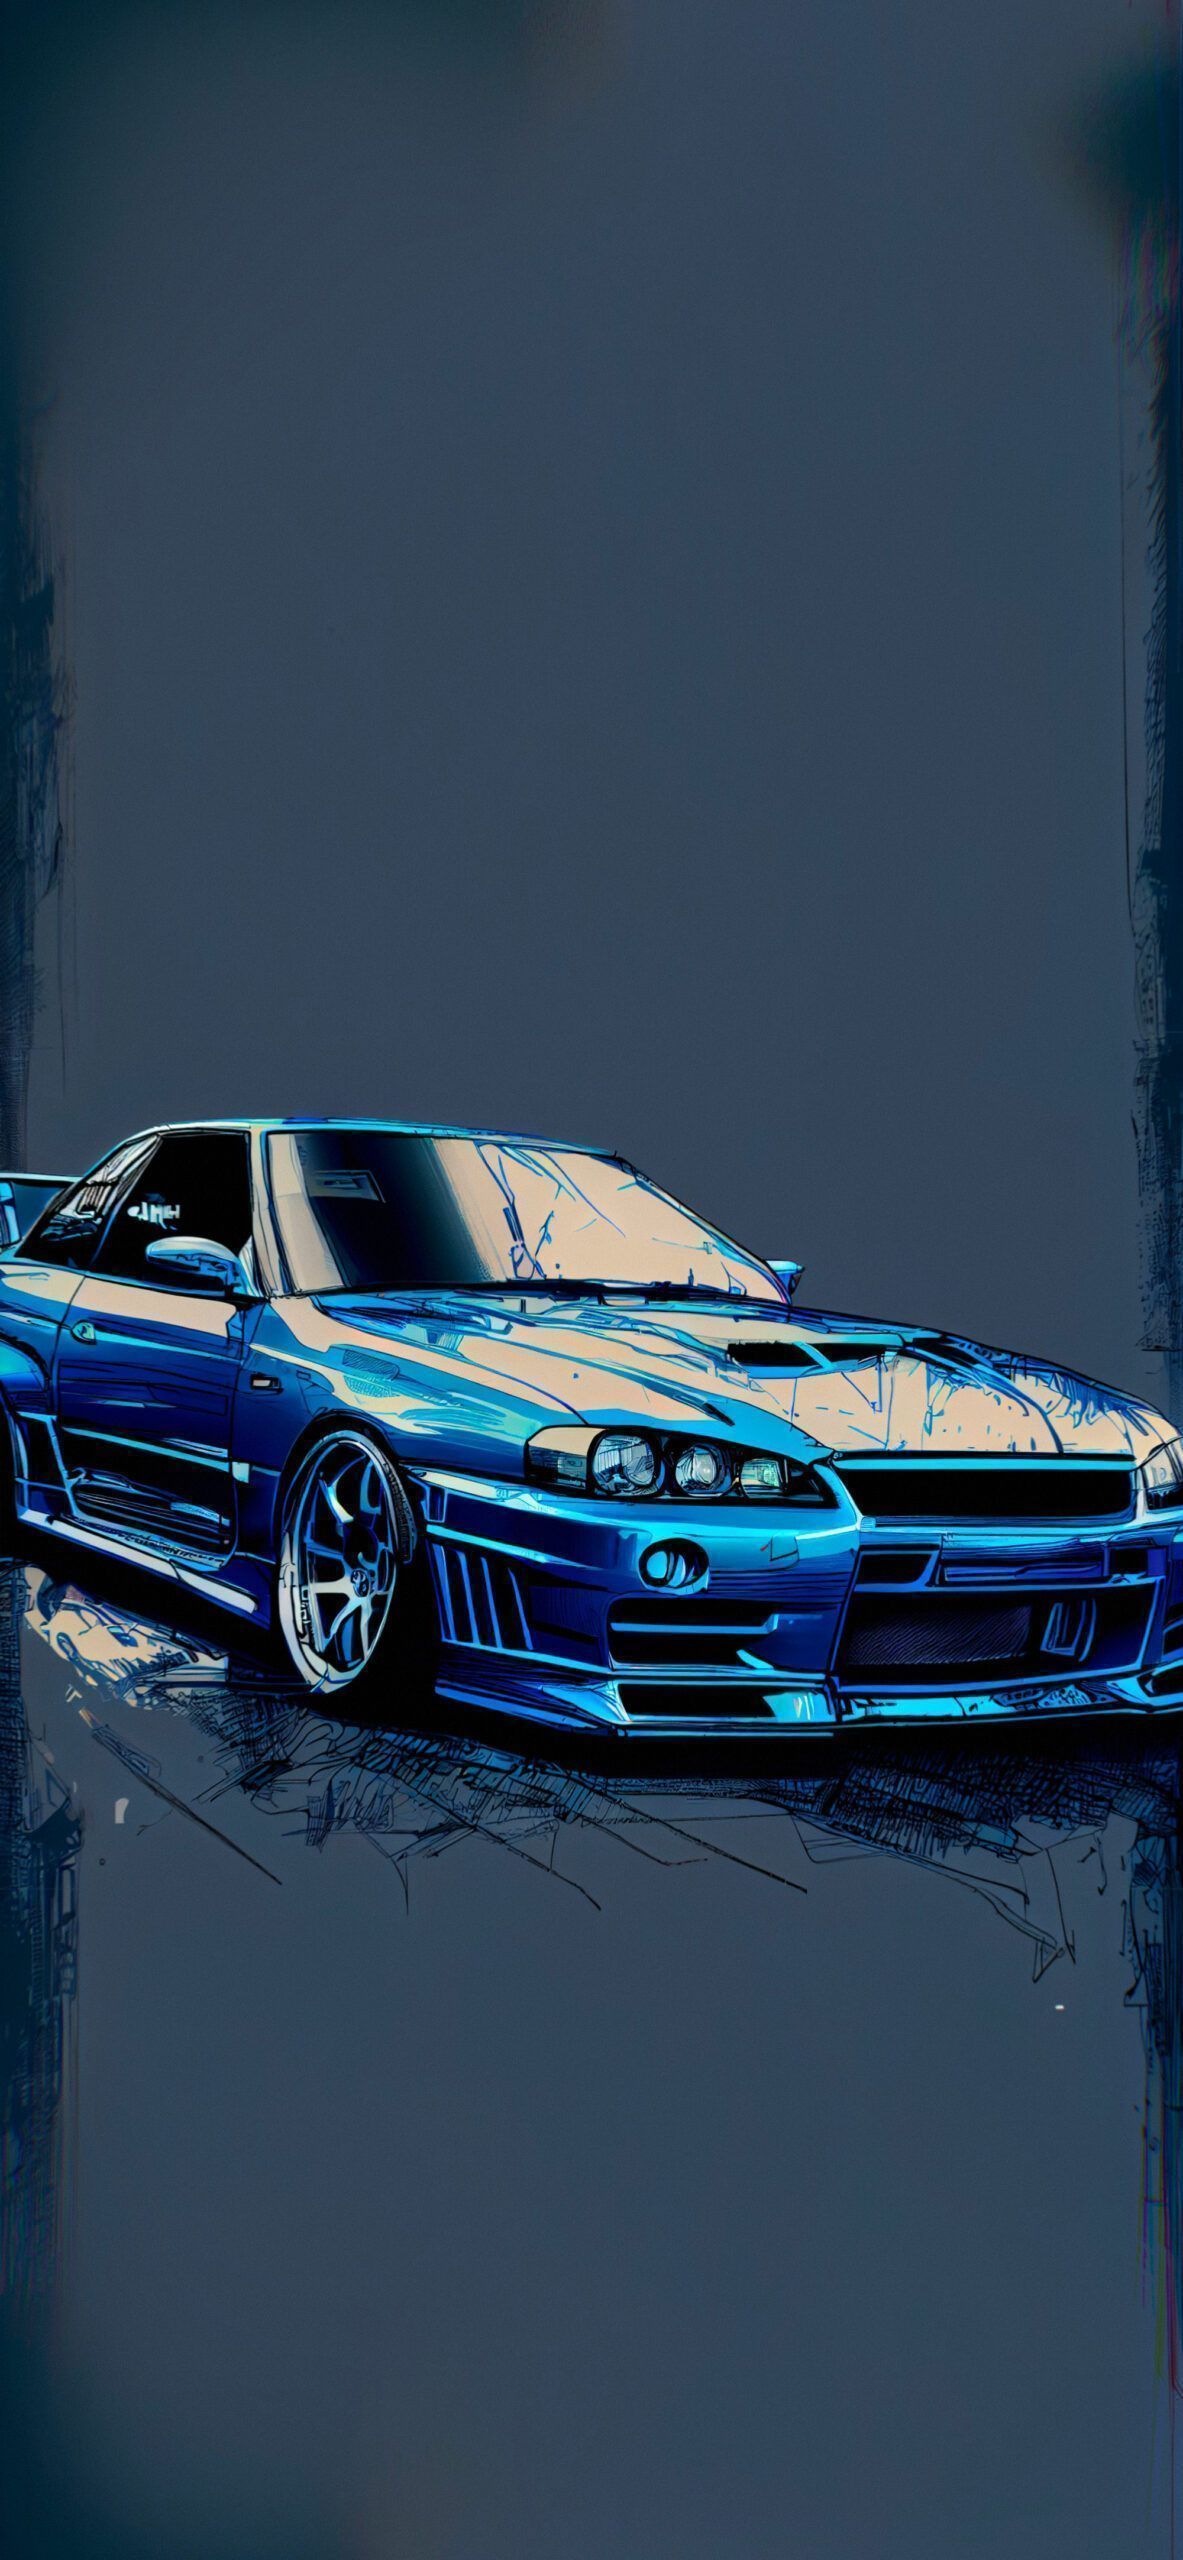 Car iPhone Wallpapers Top Free Car iPhone Backgrounds 1125x2436 - Nissan Skyline